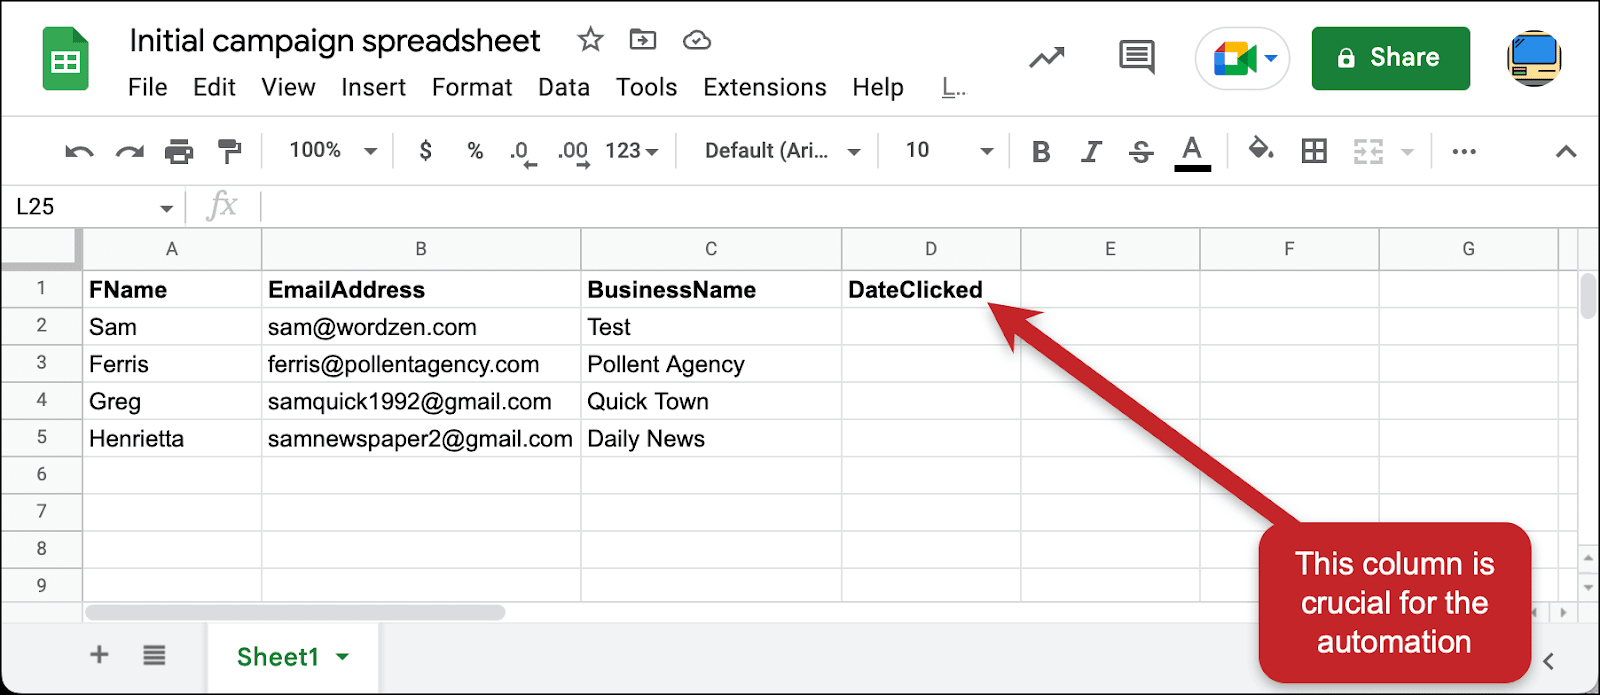 Add a DateClicked column to the Google Sheet